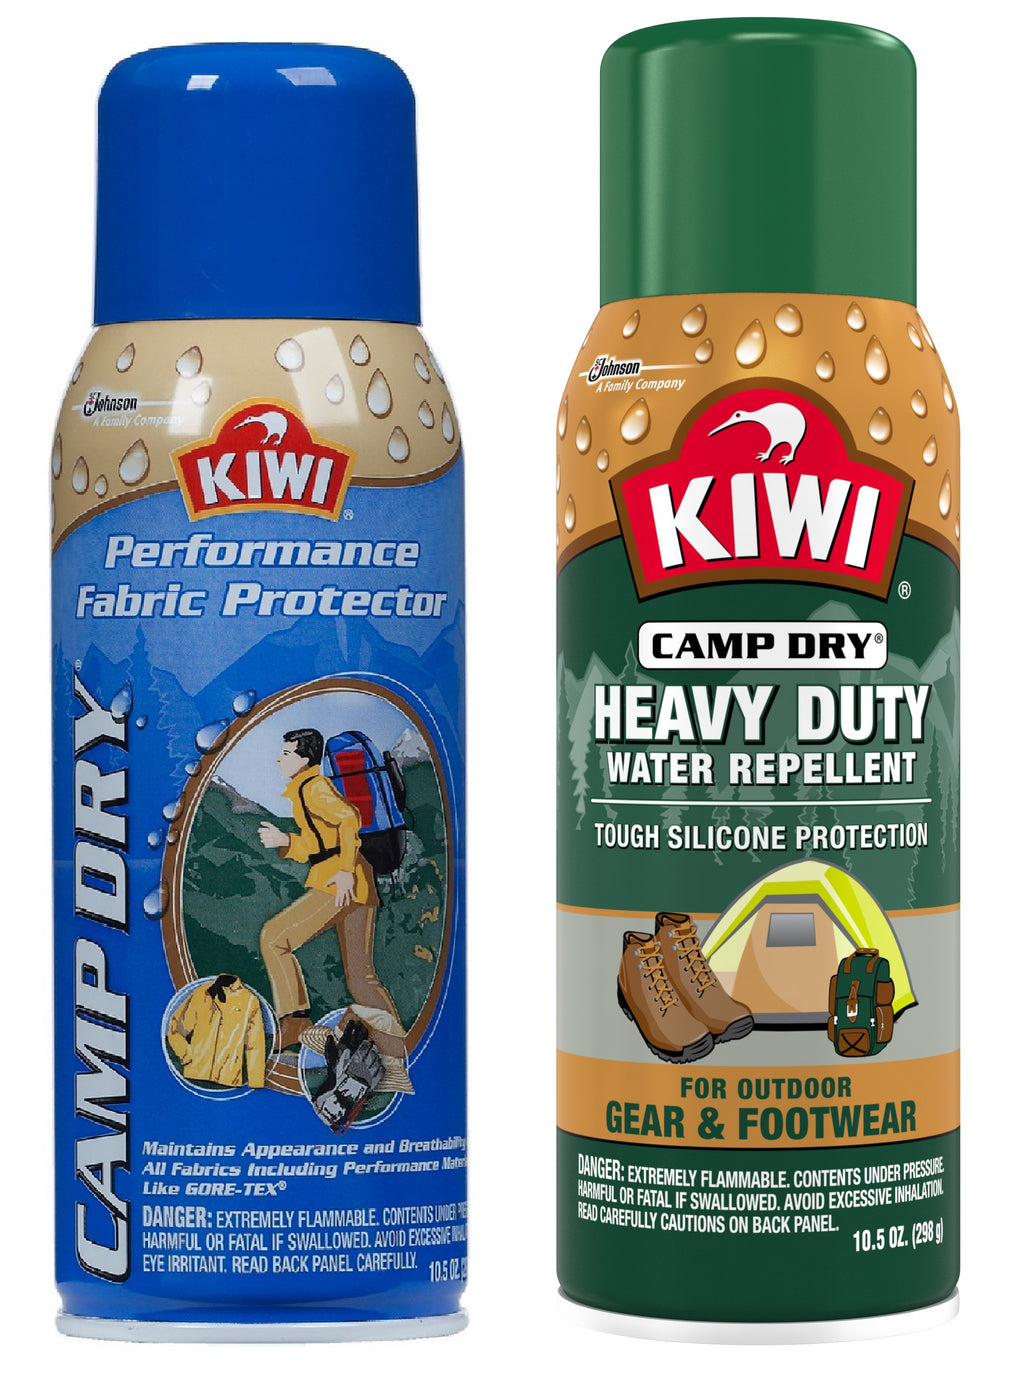 KIWI Camp Dry Variety Pack, 1 Camp Dry Fabric Protector, 1 Camp Dry He